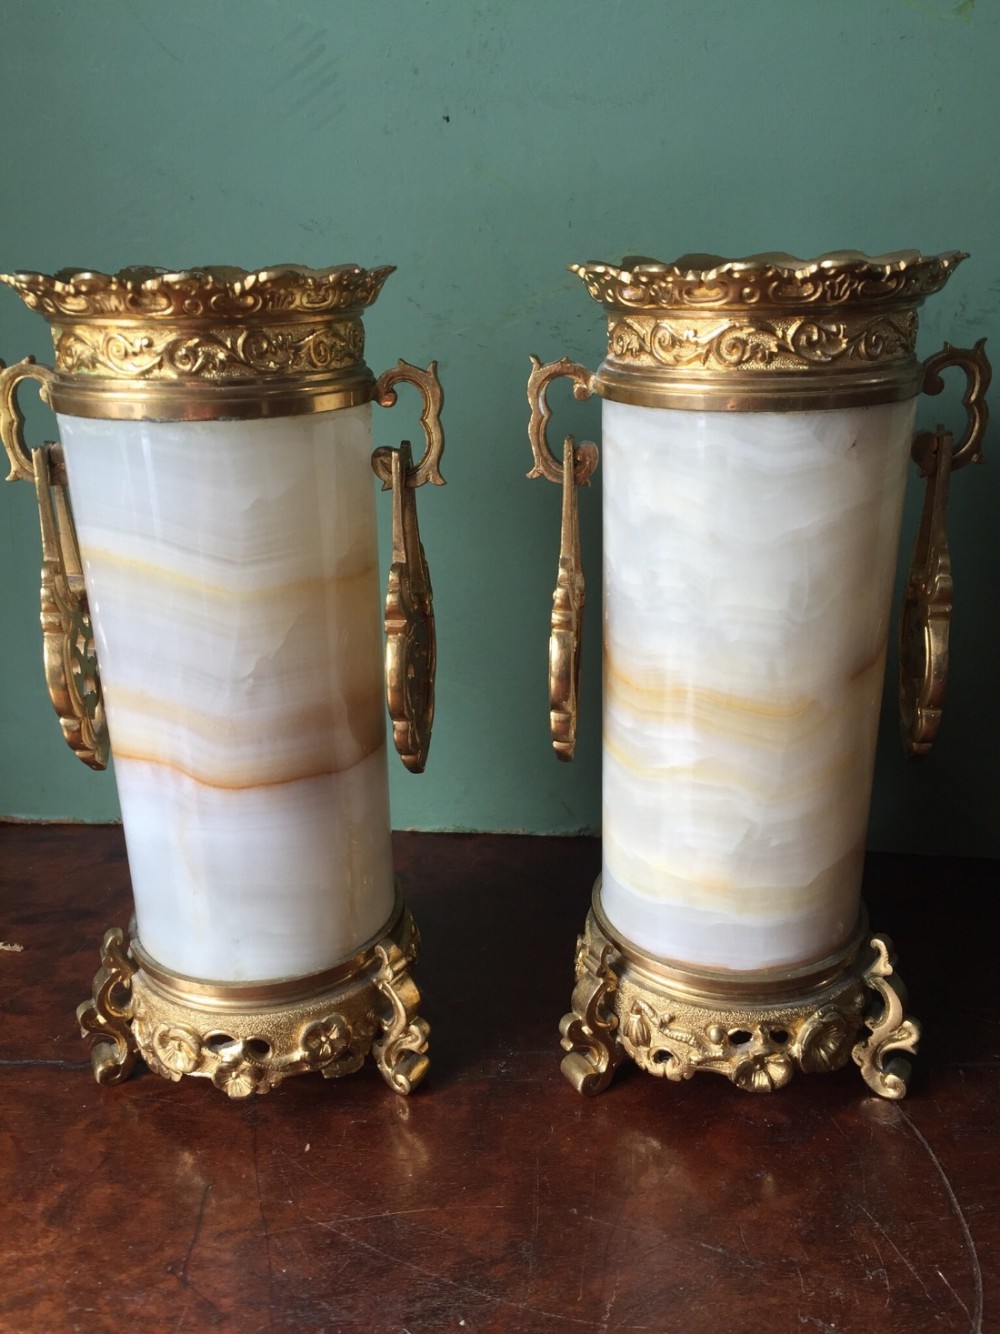 pair of late c19th french ormolumounted onyx vases in 'japonesque' style